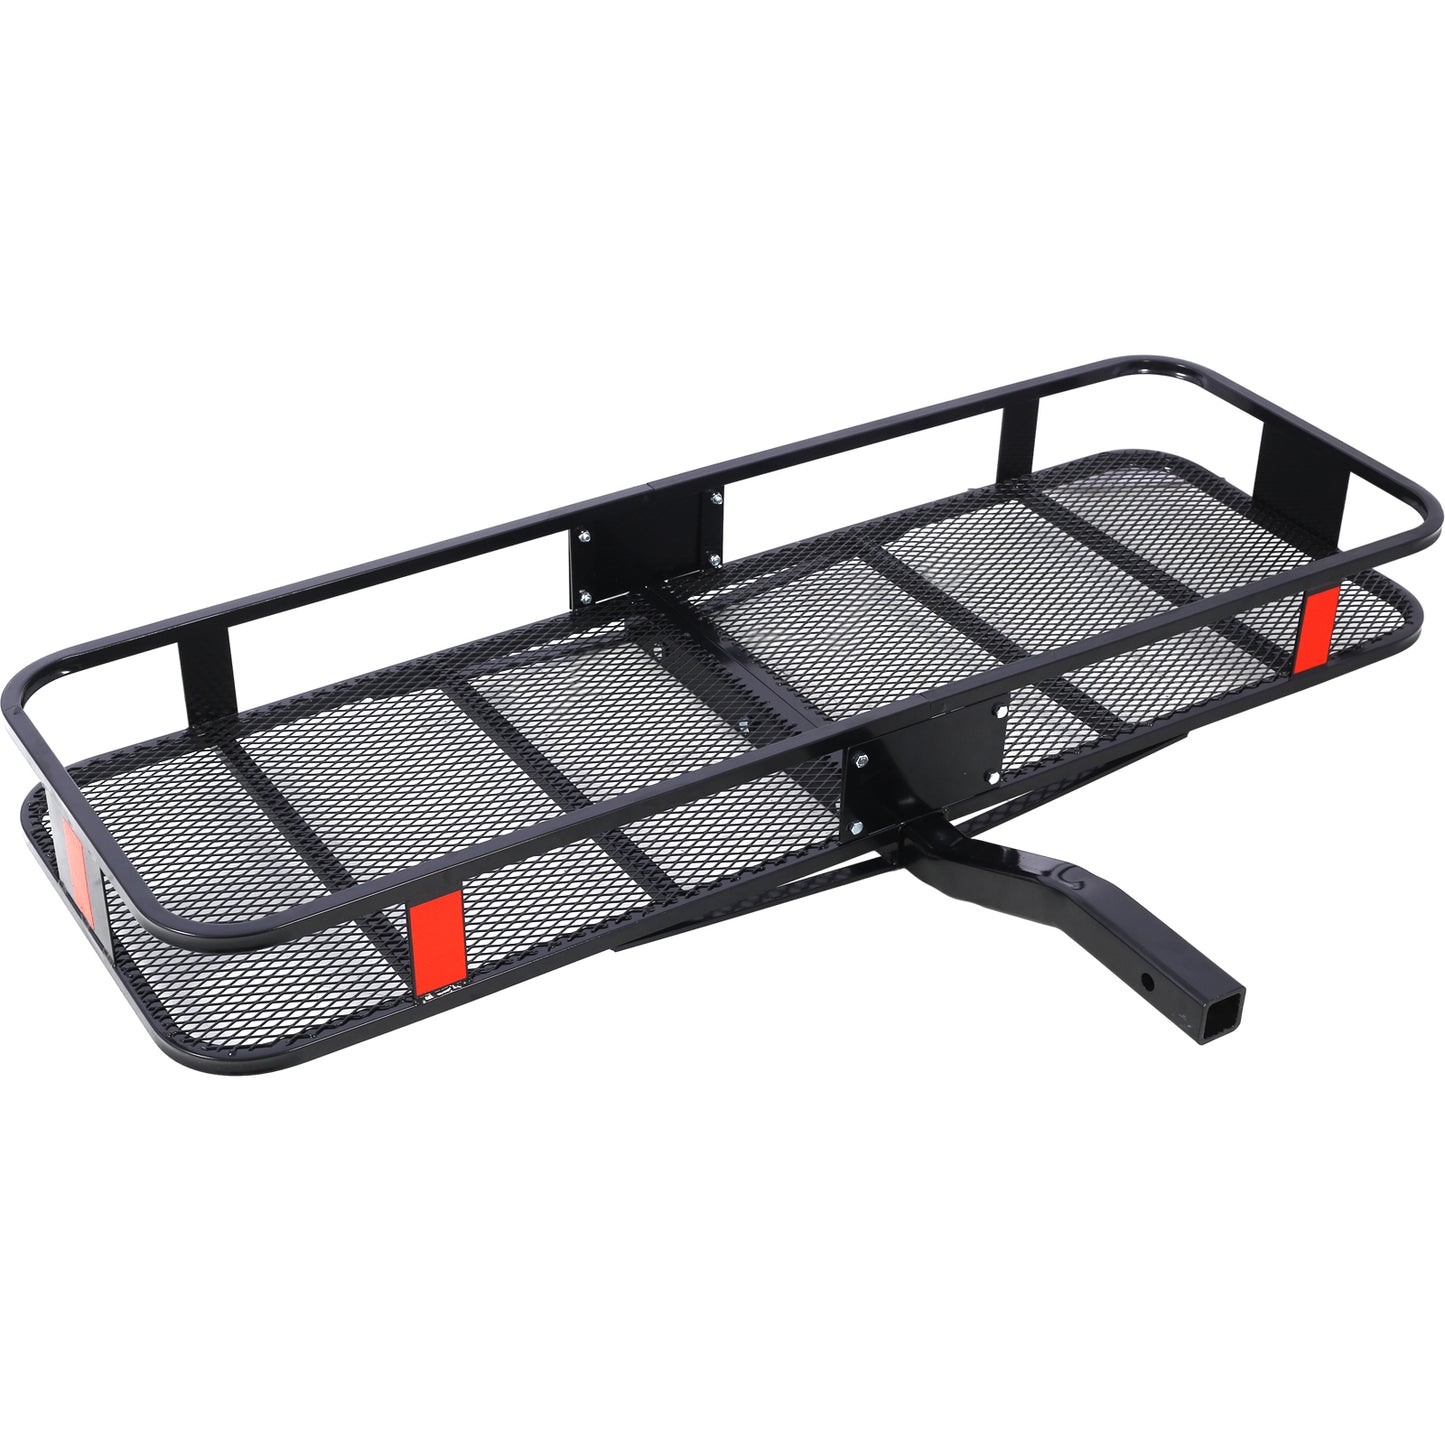 Hitch Mount Cargo Carrier Basket 60" X 21" X 6"+Waterproof Cargo Bag 16 Cubic Feet(56" 20" 20"),Hauling Weight Capacity of 500 Lbs and A Folding Arm.with Hitch Stabilizer,Net and Straps